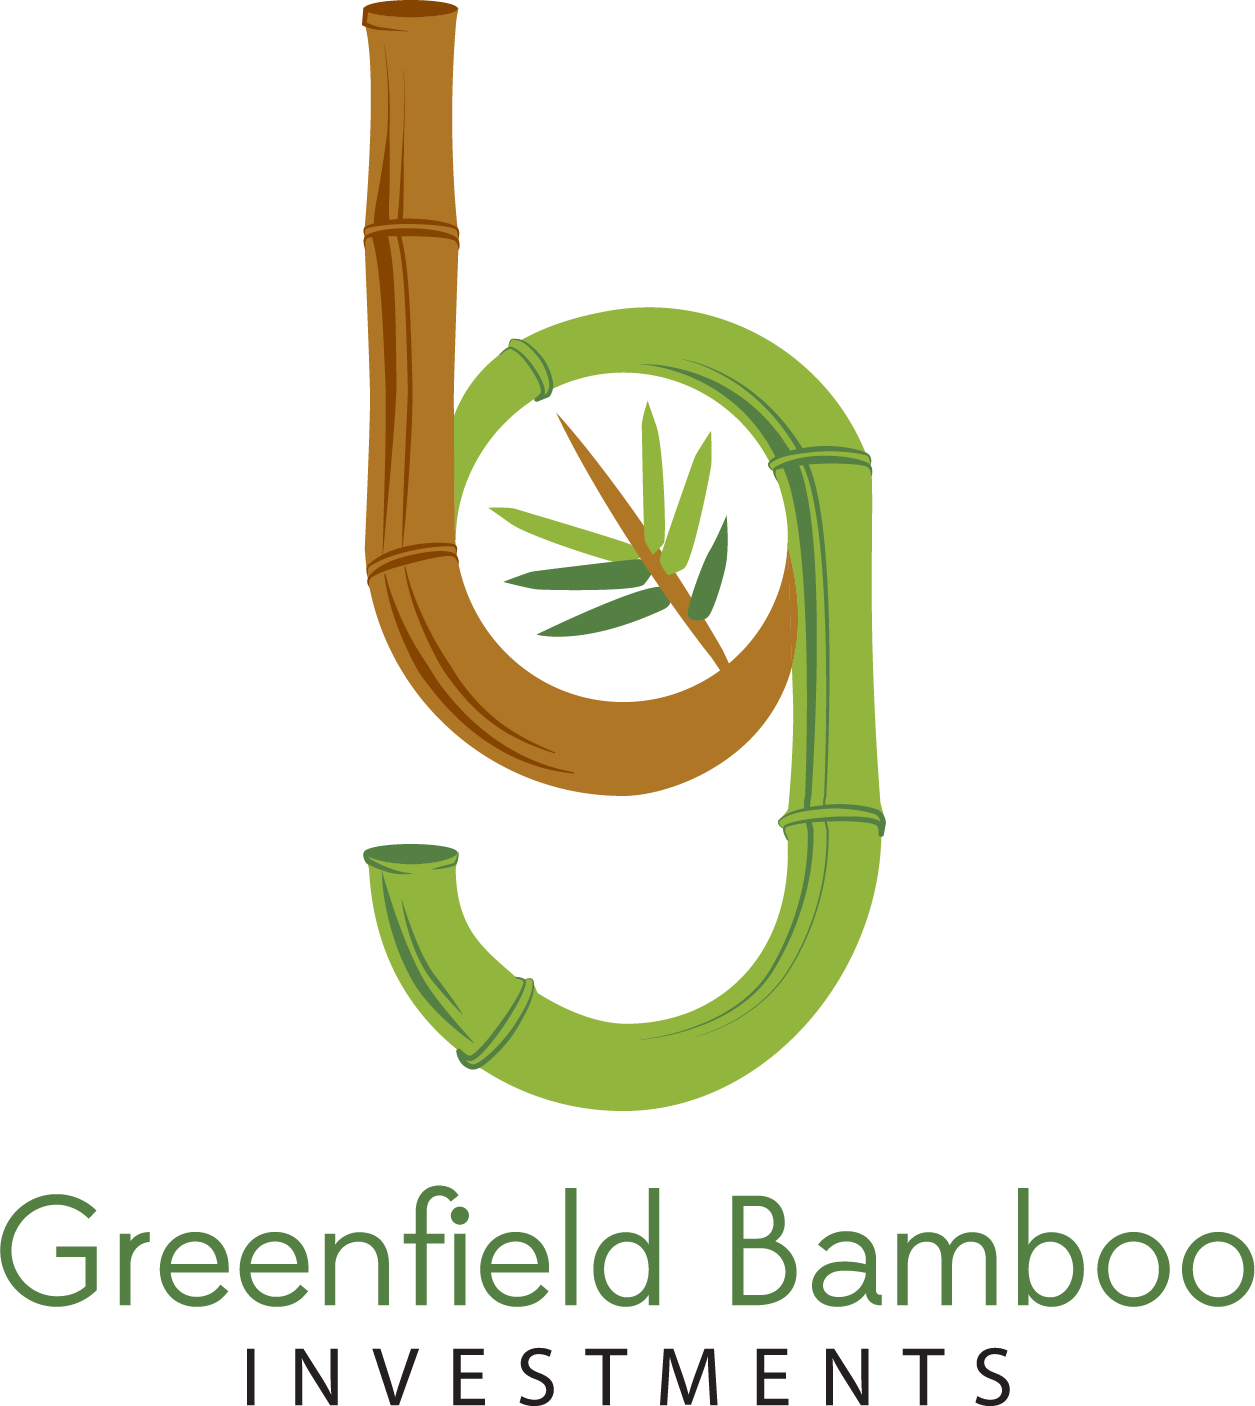 Greenfield Bamboo Investments